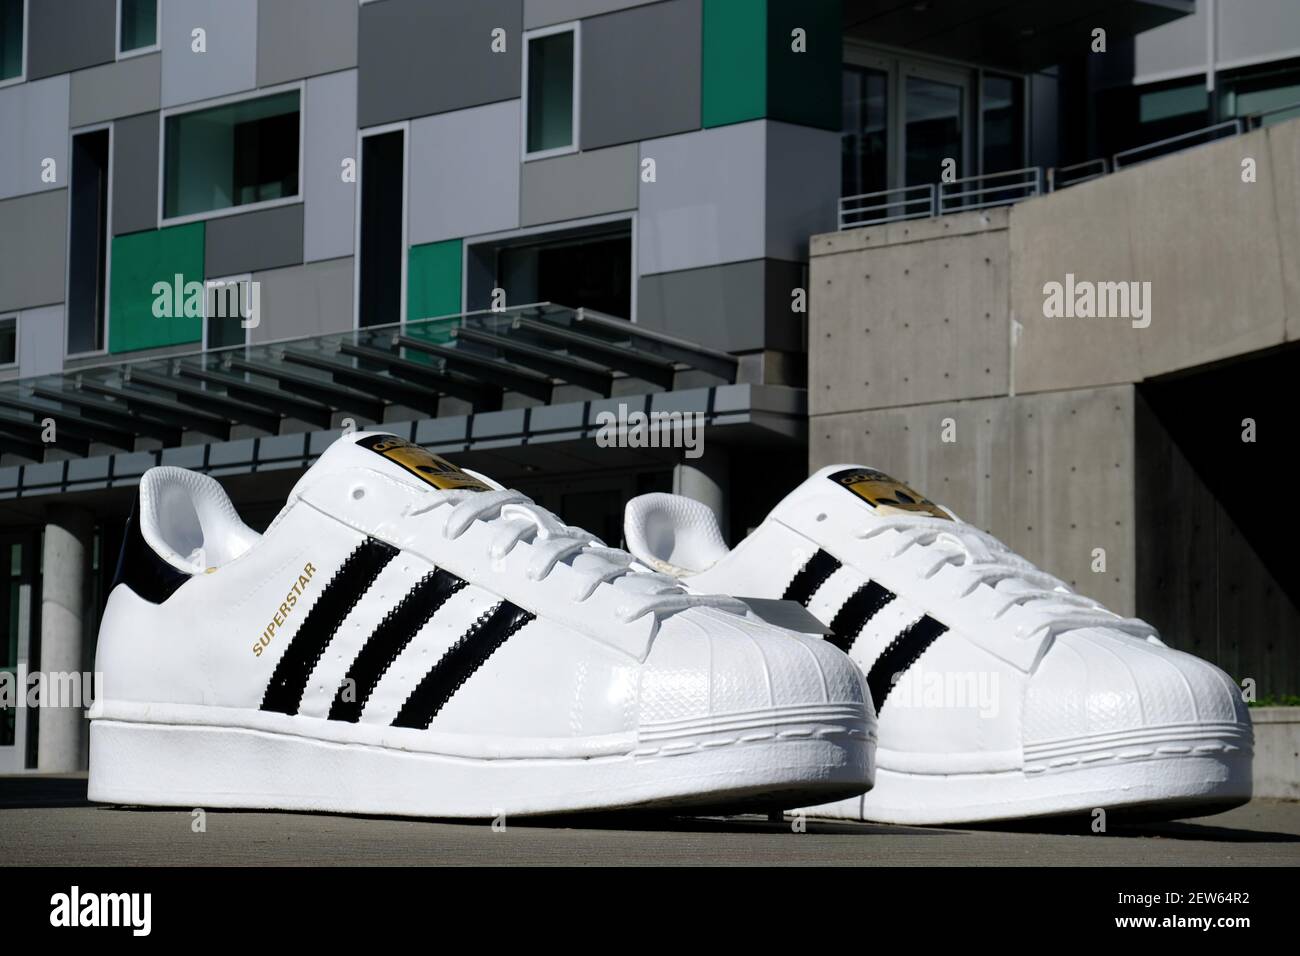 Superstar shoes are pictured at the Adidas North American headquarters in  Portland, Ore., on September 26, 2017. Adidas executive Jim Gatto, who  worked out of the Portland headquarters, was charged by the